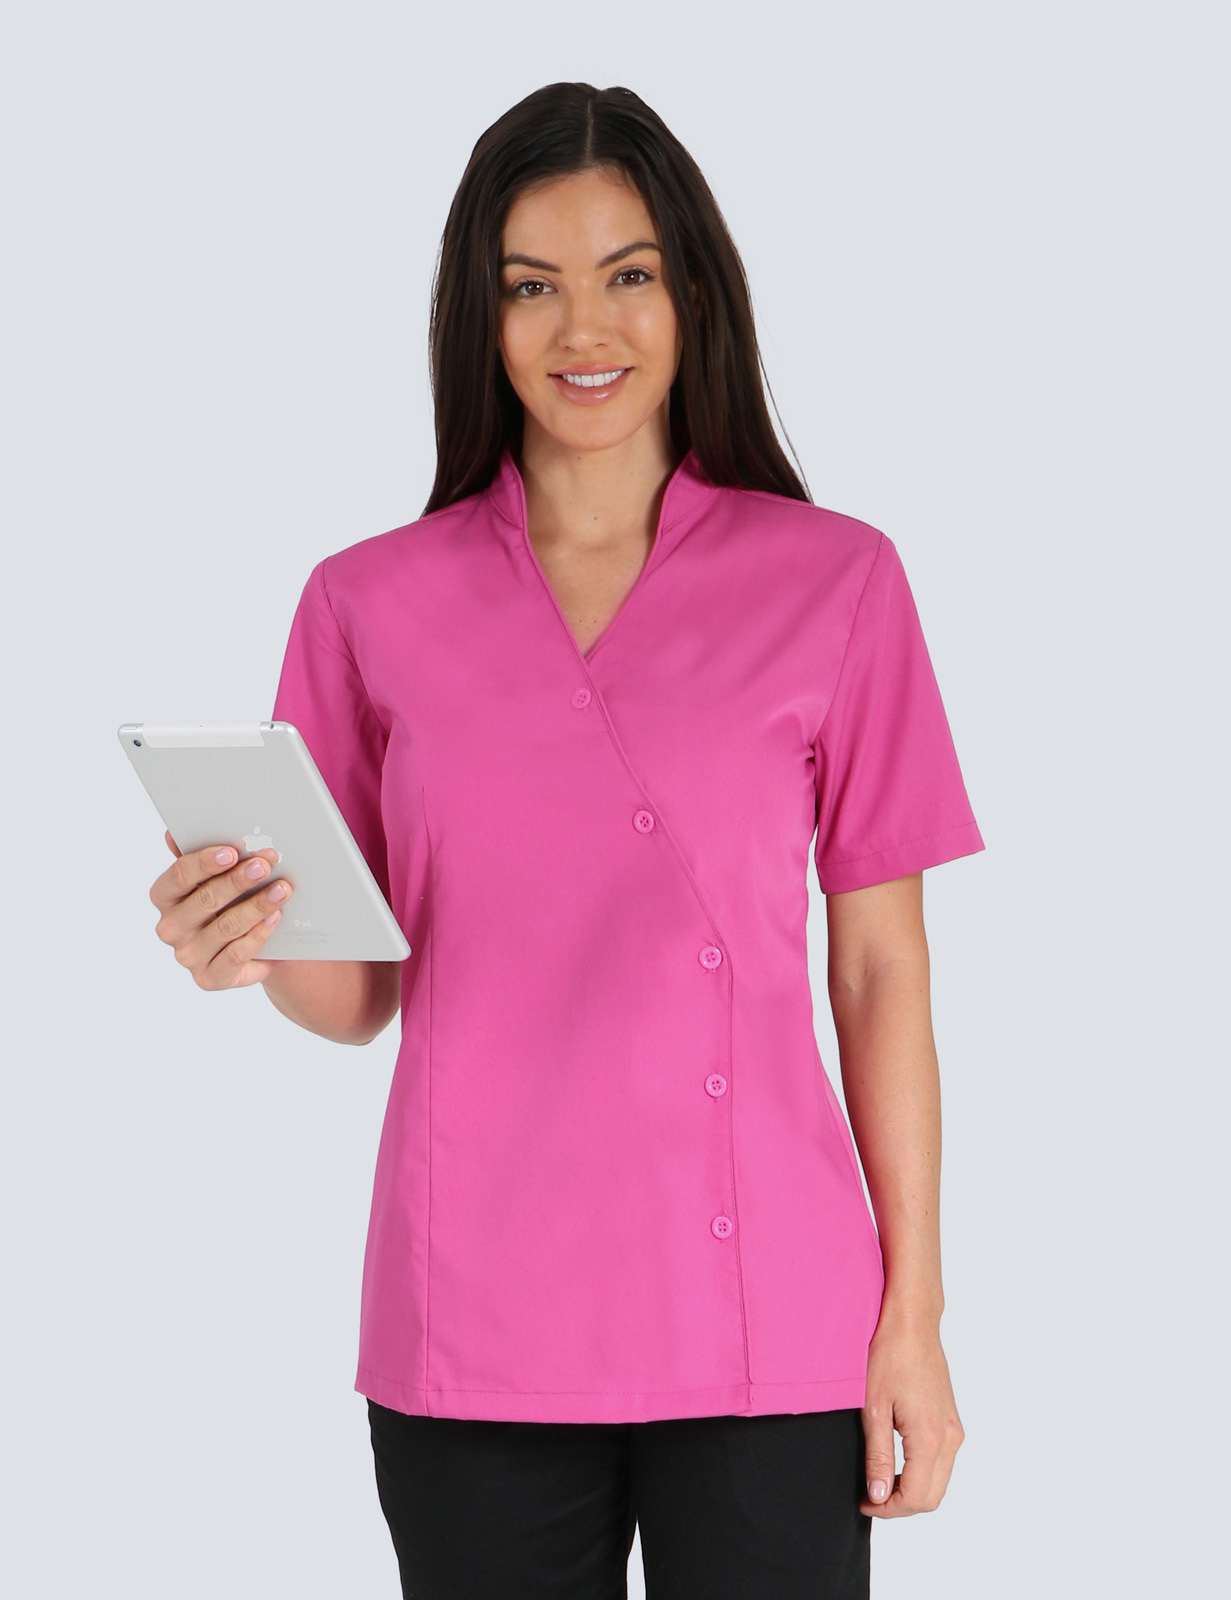 Jessie Style Tunic Top - Pink - 3X Large